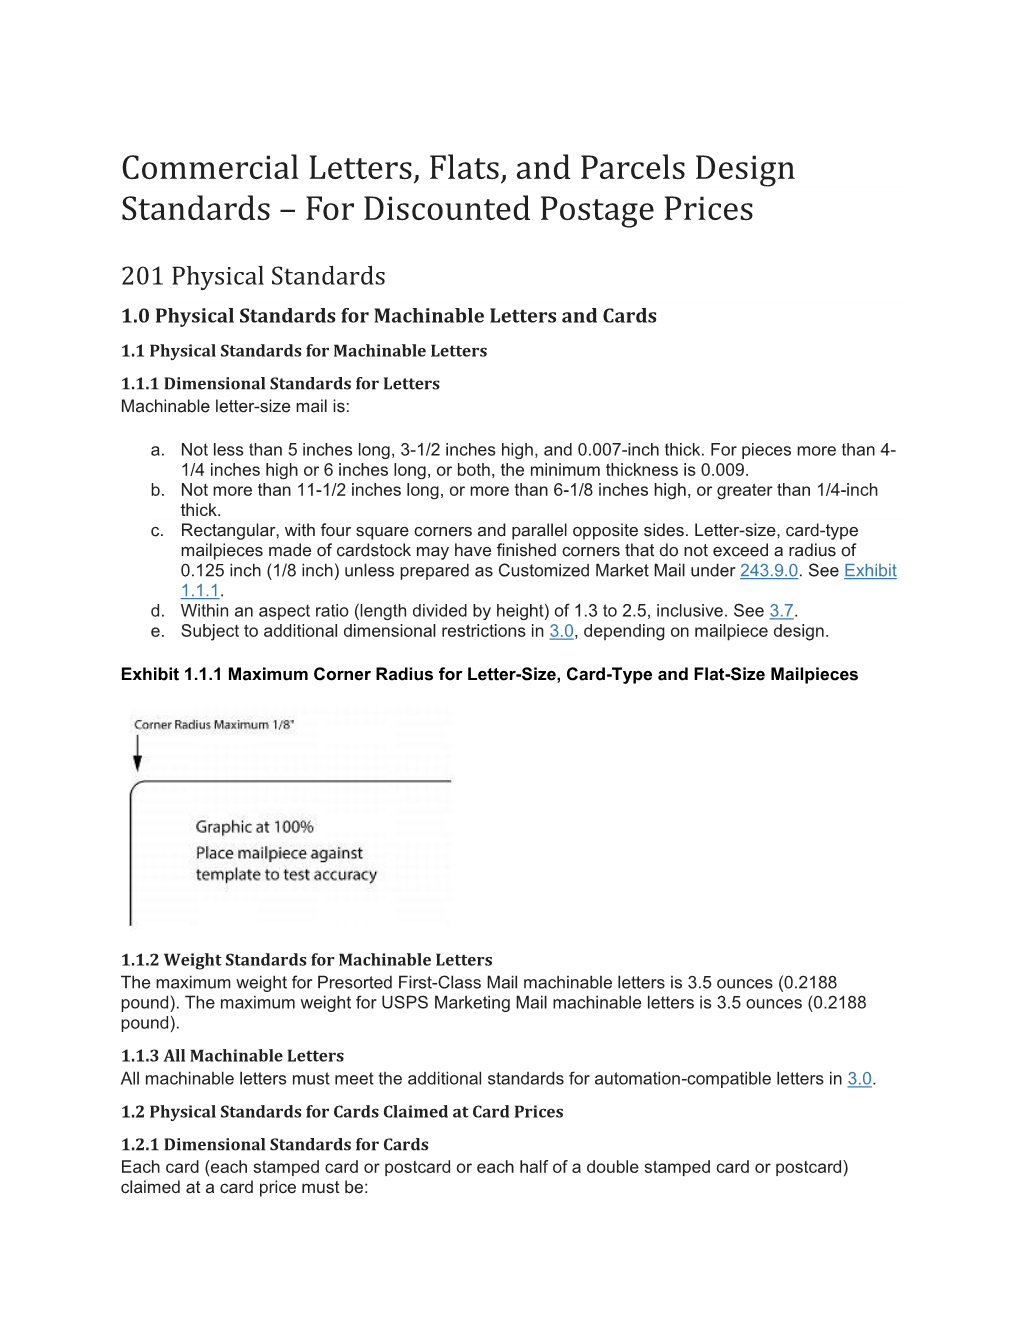 Commercial Letters, Flats, and Parcels Design Standards – for Discounted Postage Prices